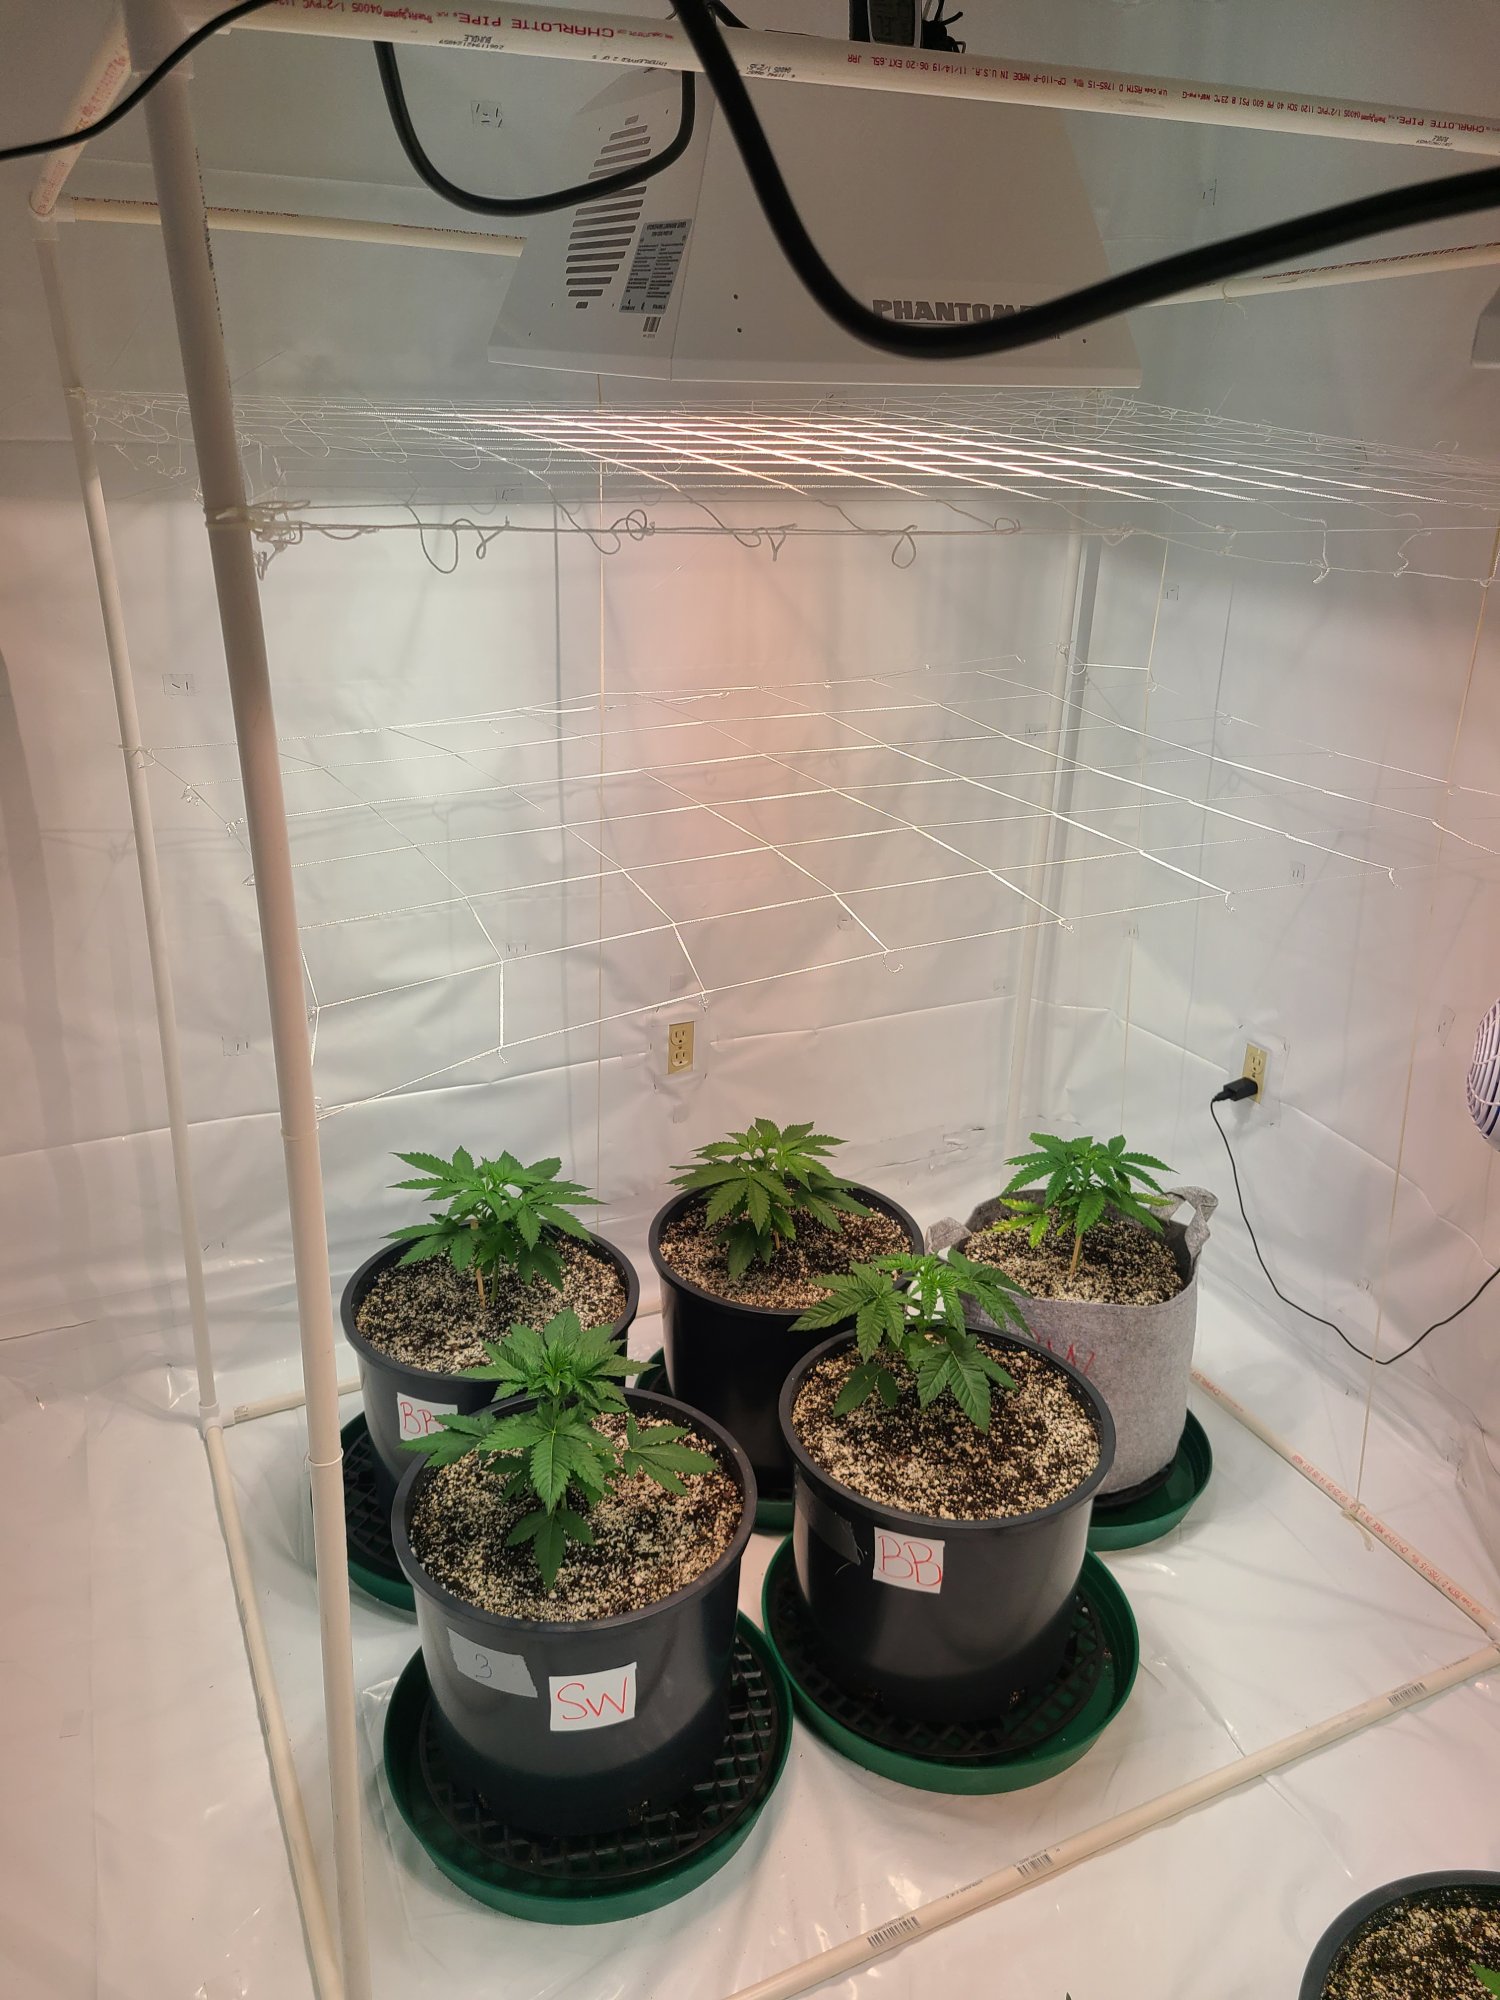 Can you top and scrog